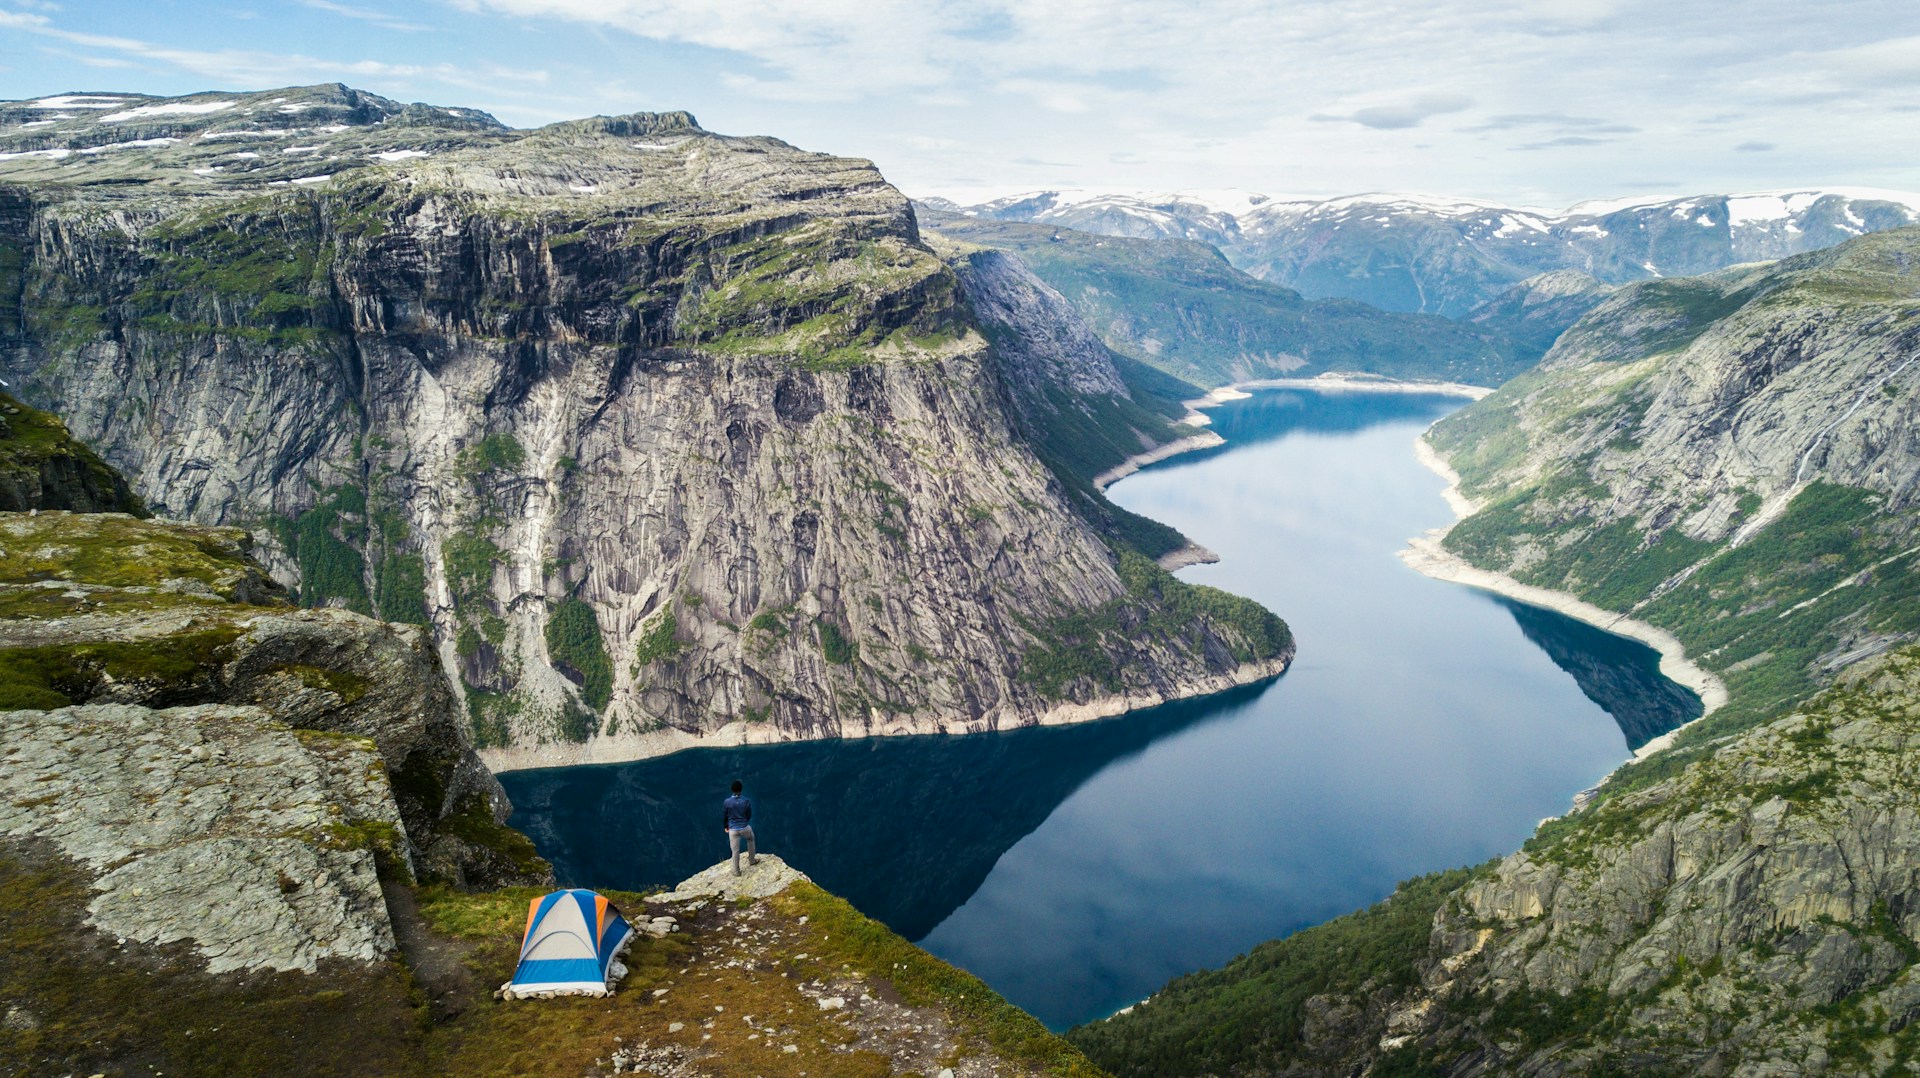 Digital Nomads accommodation in Fjord Norway)